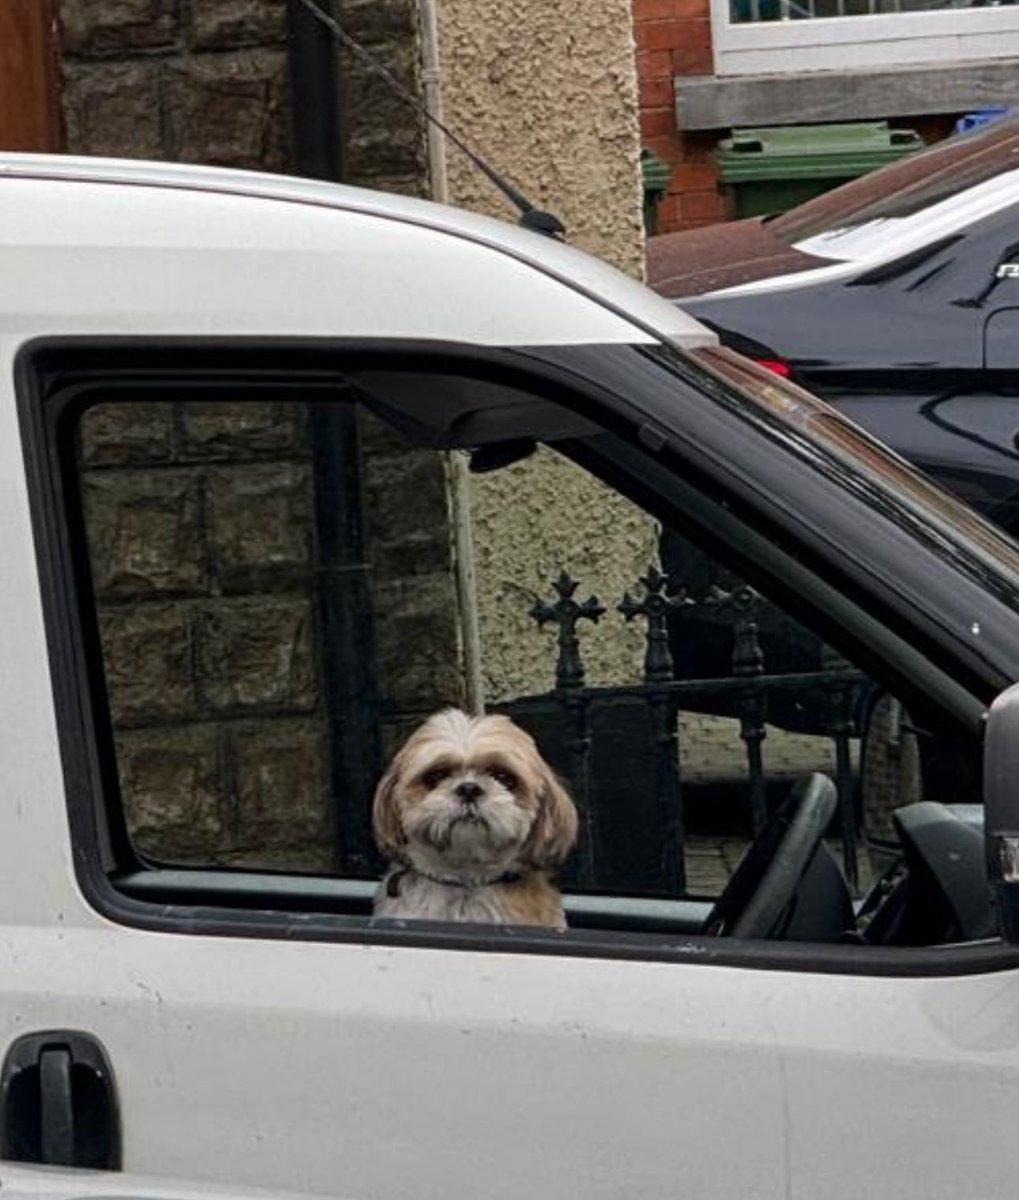 While I was campaigning today in Swords and Malahide, we spotted this little voter and even he said he was voting for me. 
Even the dogs on the streets know I’m the best man for the job.